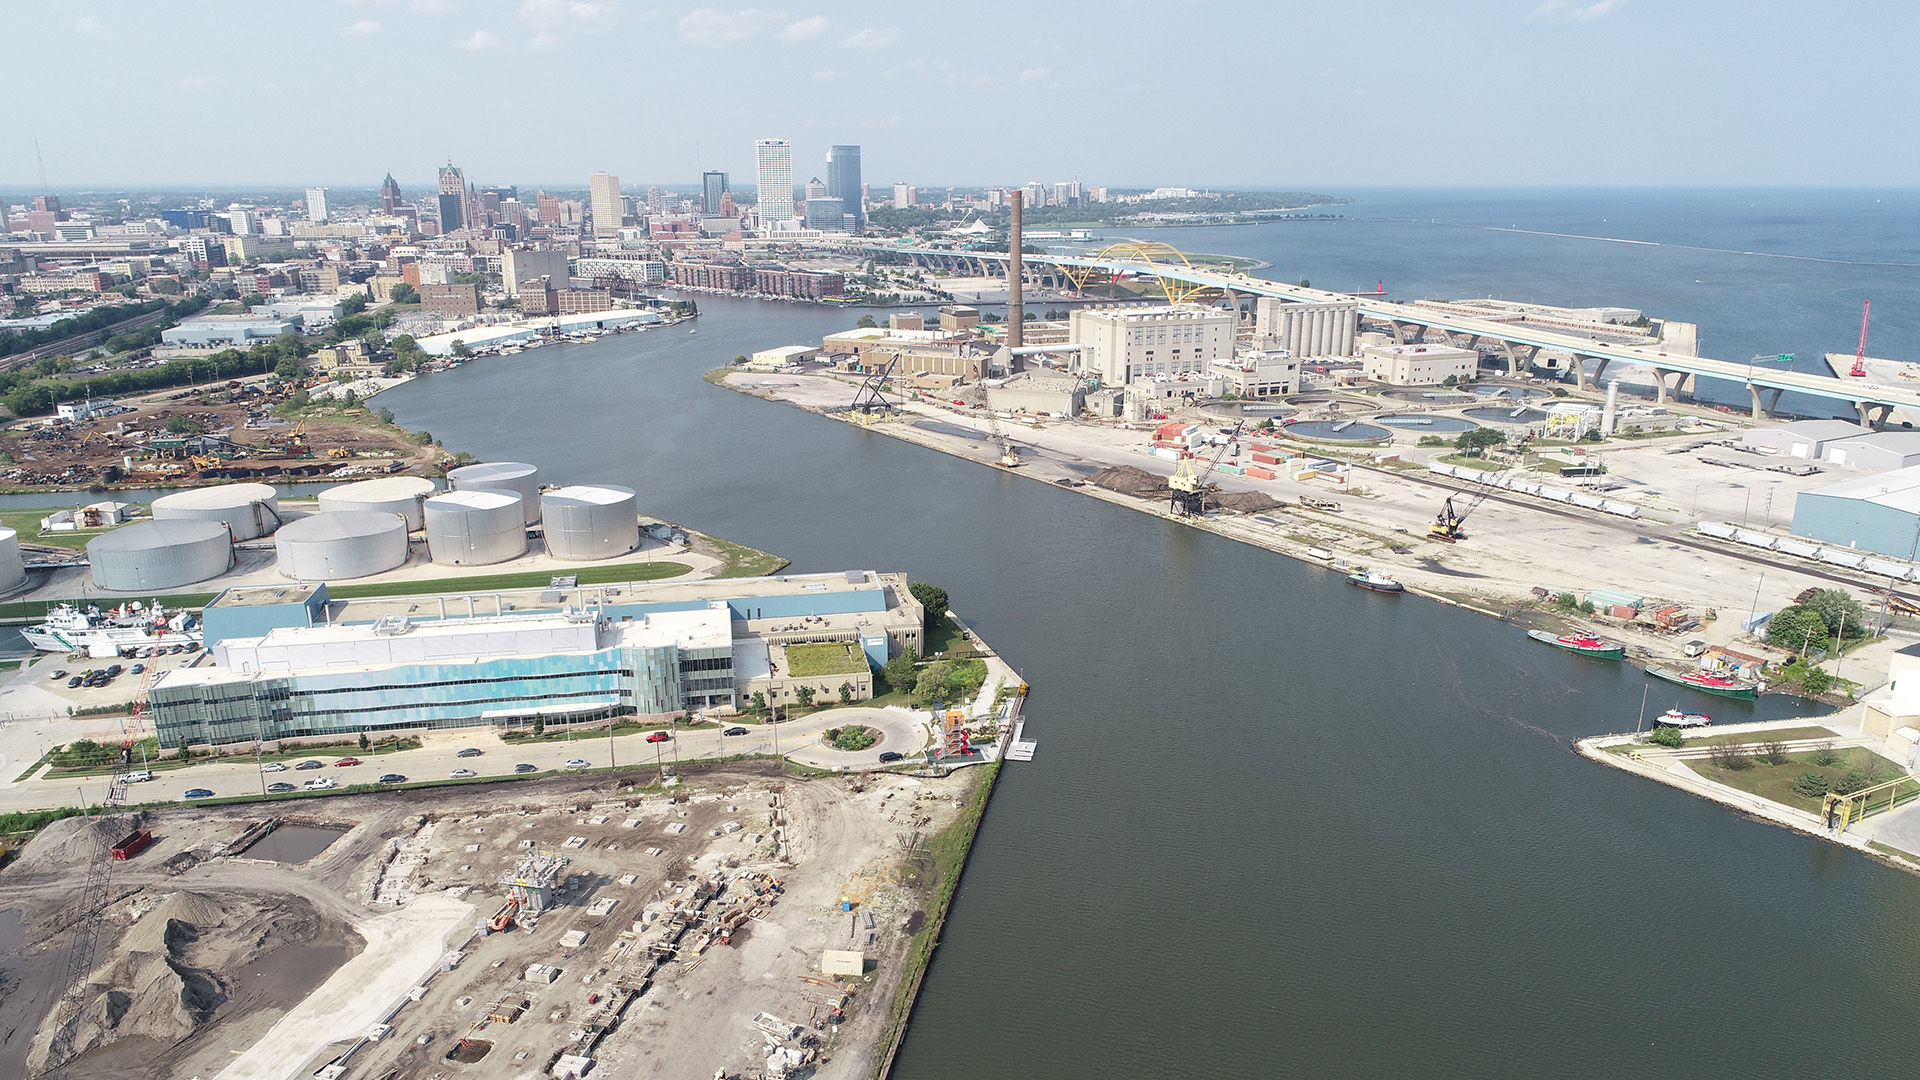 An aerial photo shows a wide river mouth surrounded by industrial development, with a downtown skyline in the background.